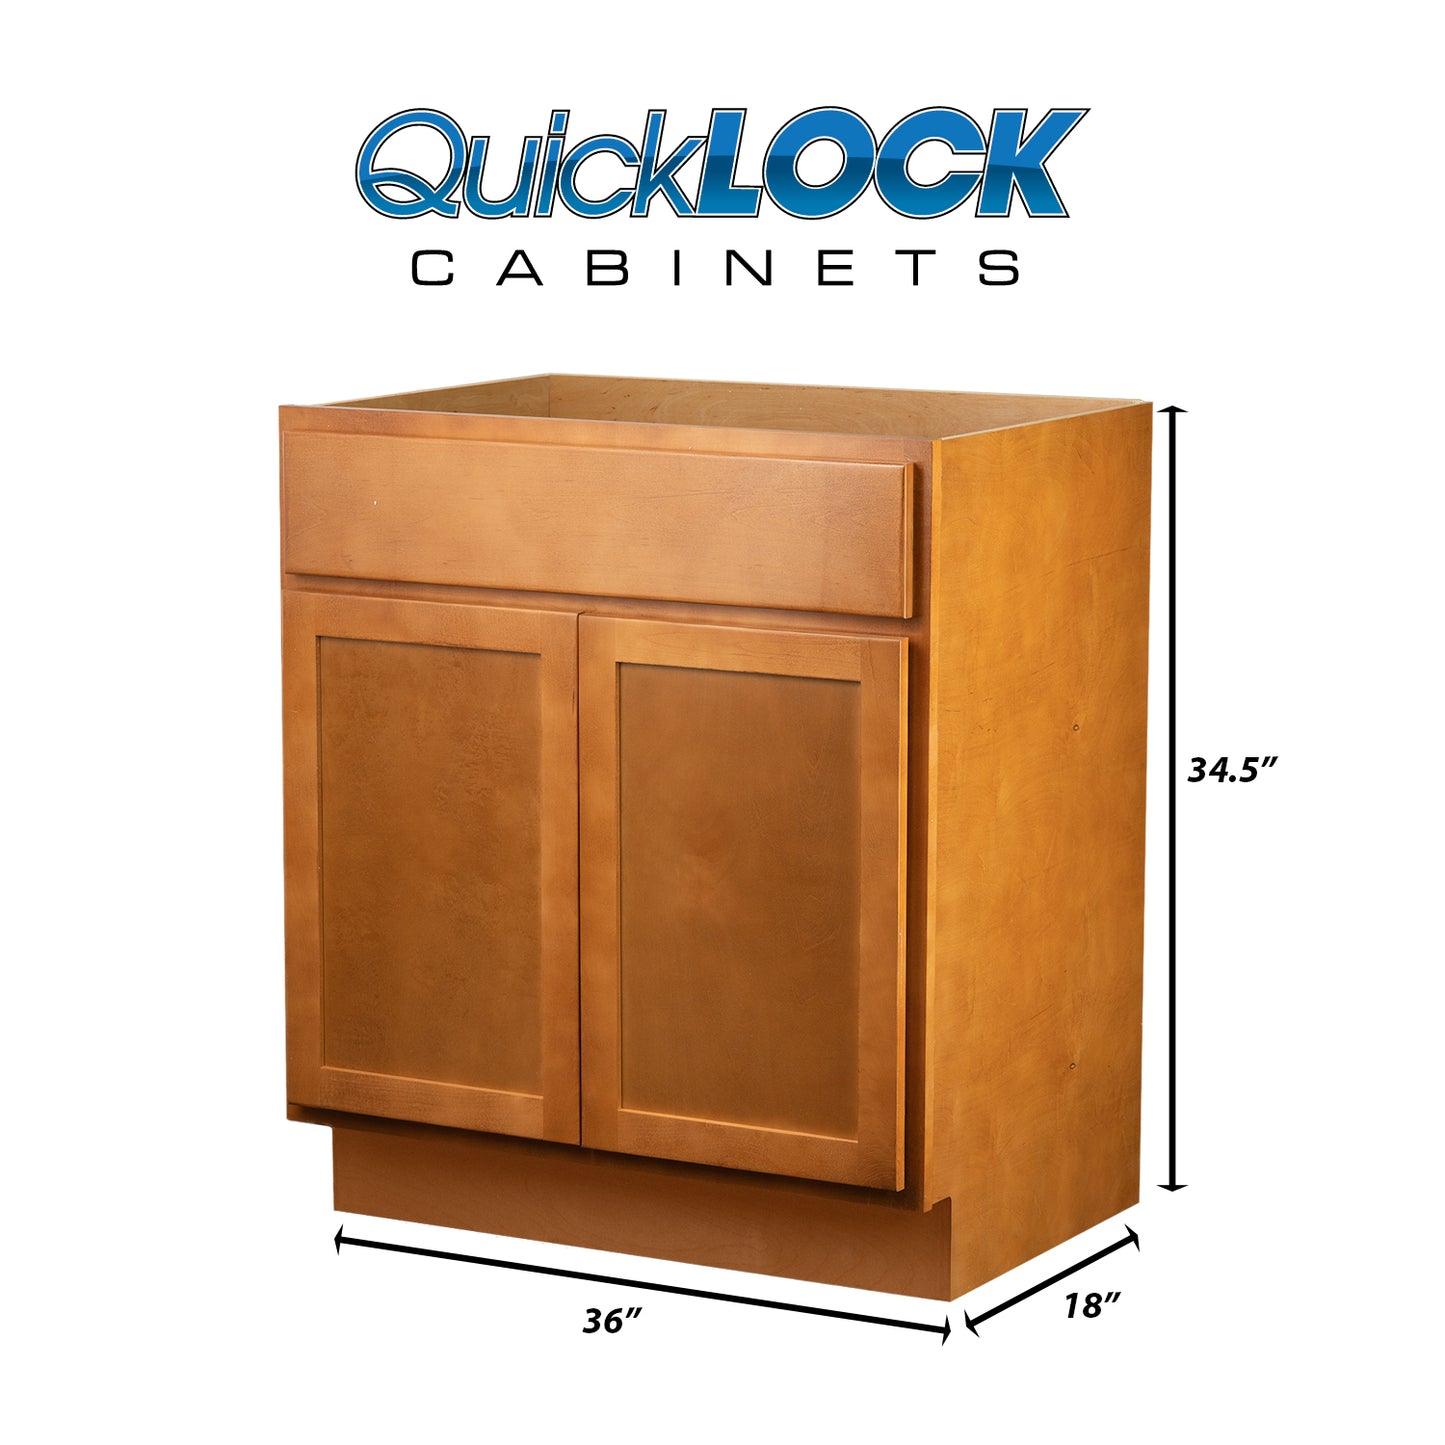 Quicklock RTA (Ready-to-Assemble) Provincial Stain Vanity Base Cabinet | 36"Wx34.5"Hx18"D